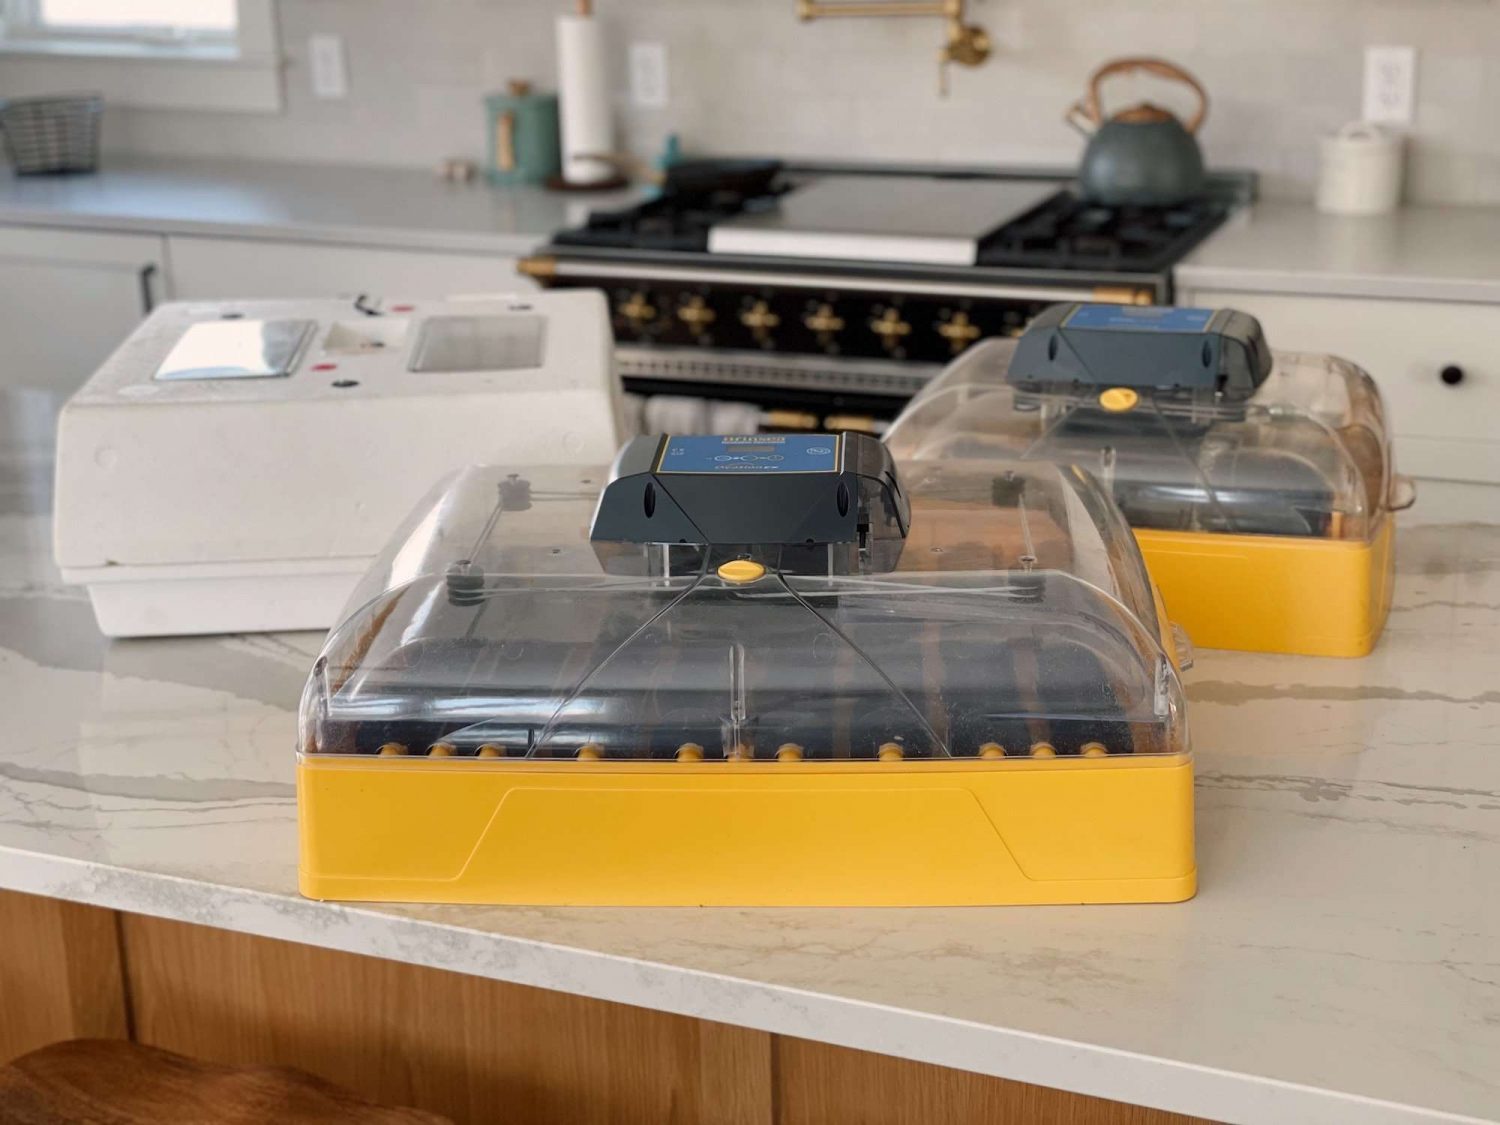 Staging photo of 3 different incubators on a kitchen island